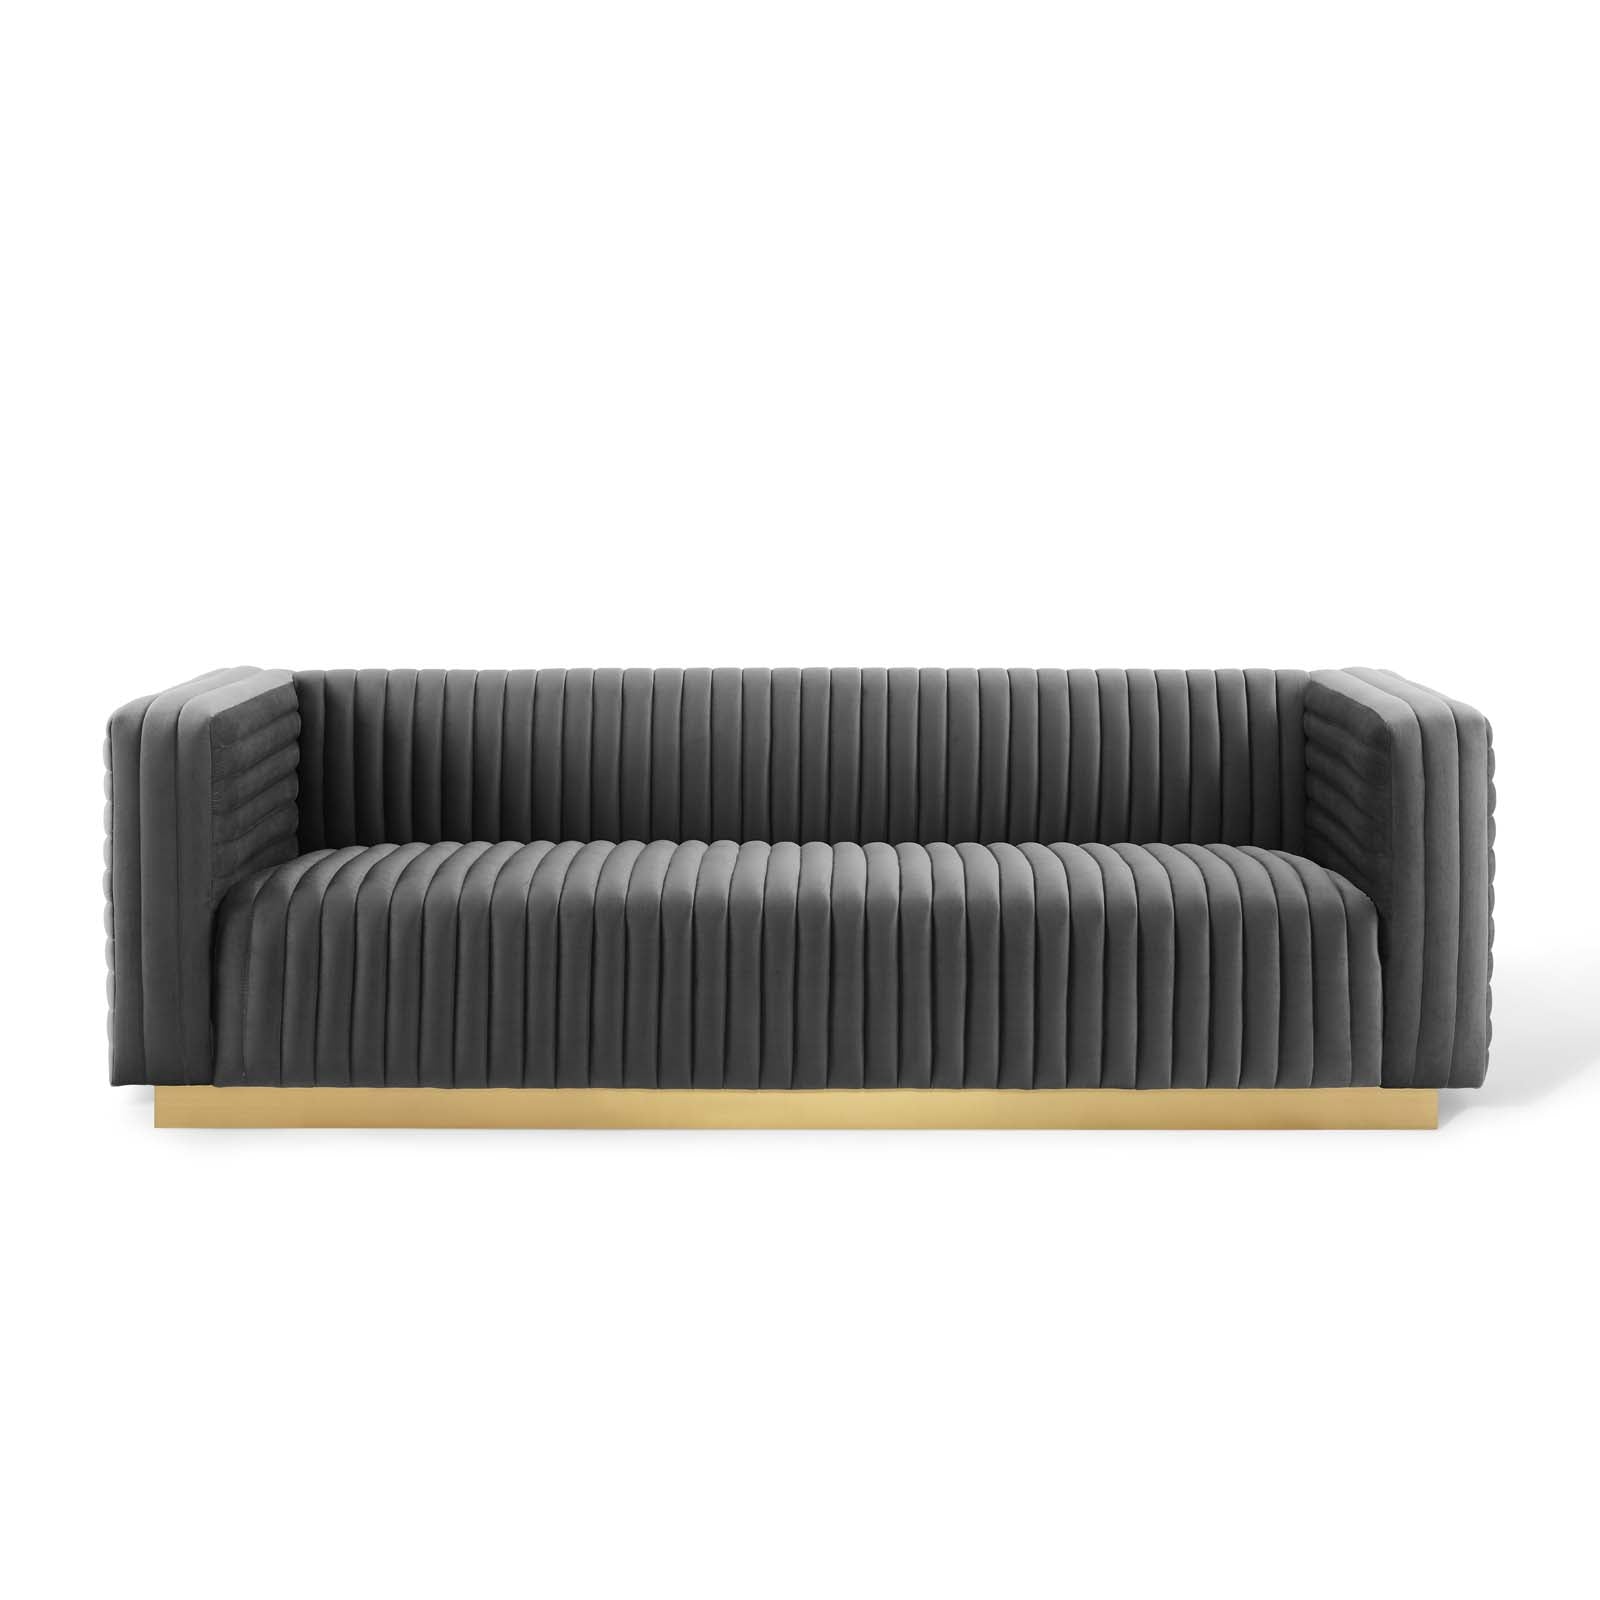 Modway Sofas & Couches - Charisma Channel Tufted Performance Velvet Living Room Sofa Charcoal